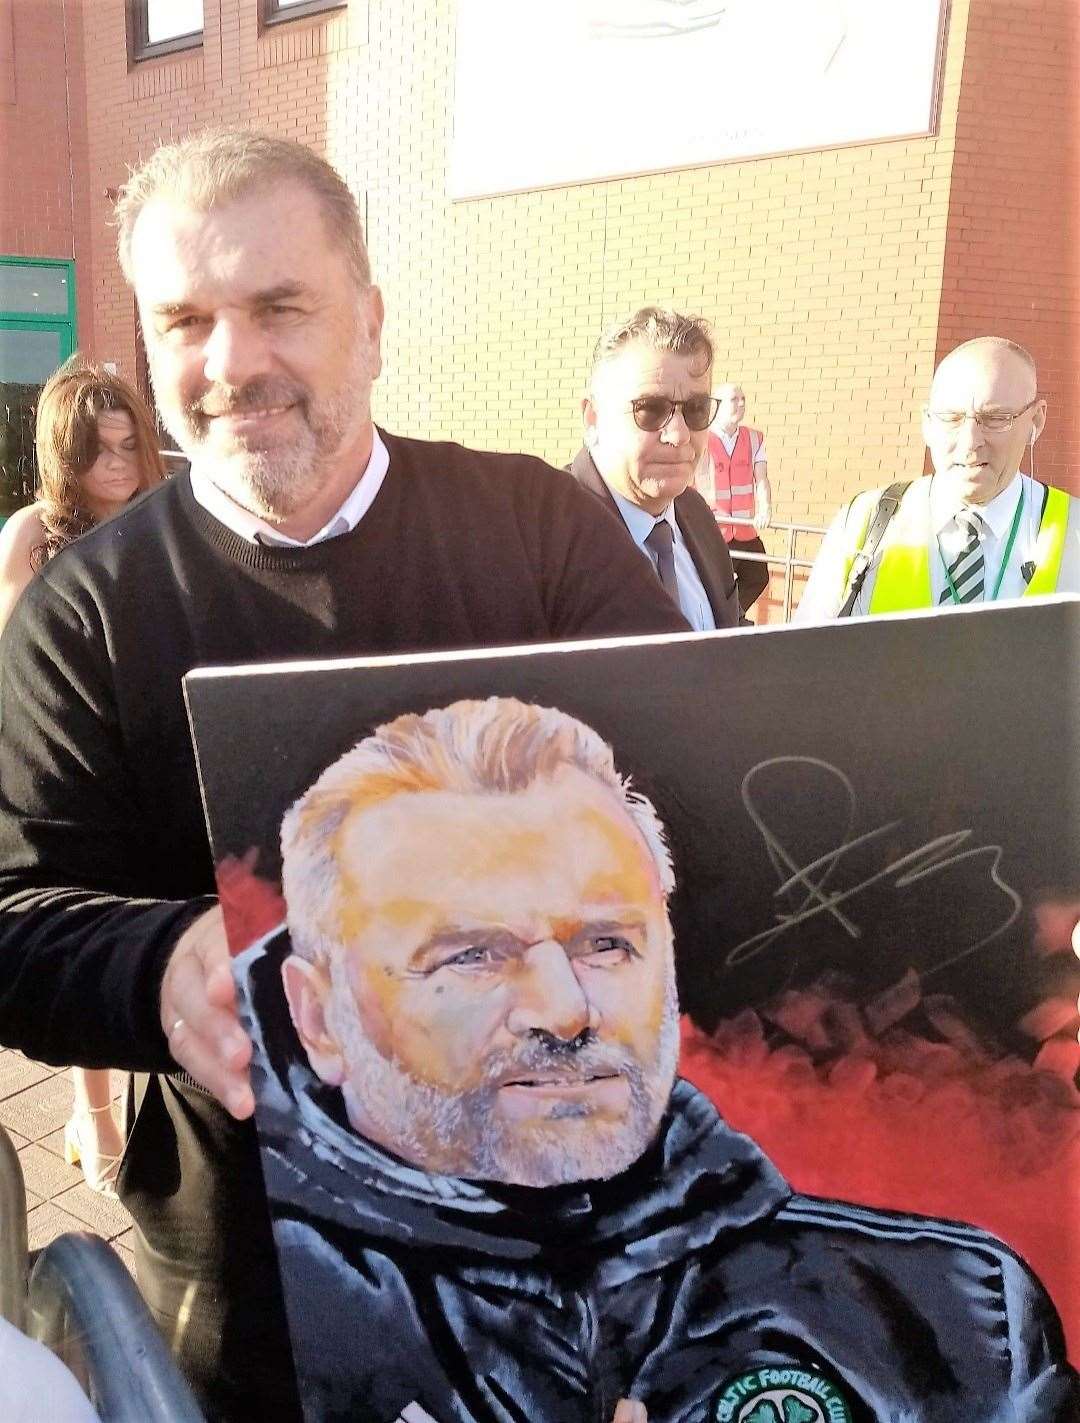 Celtic's manager Ange Postecoglou signed the painting by Davie Greig from Thurso.